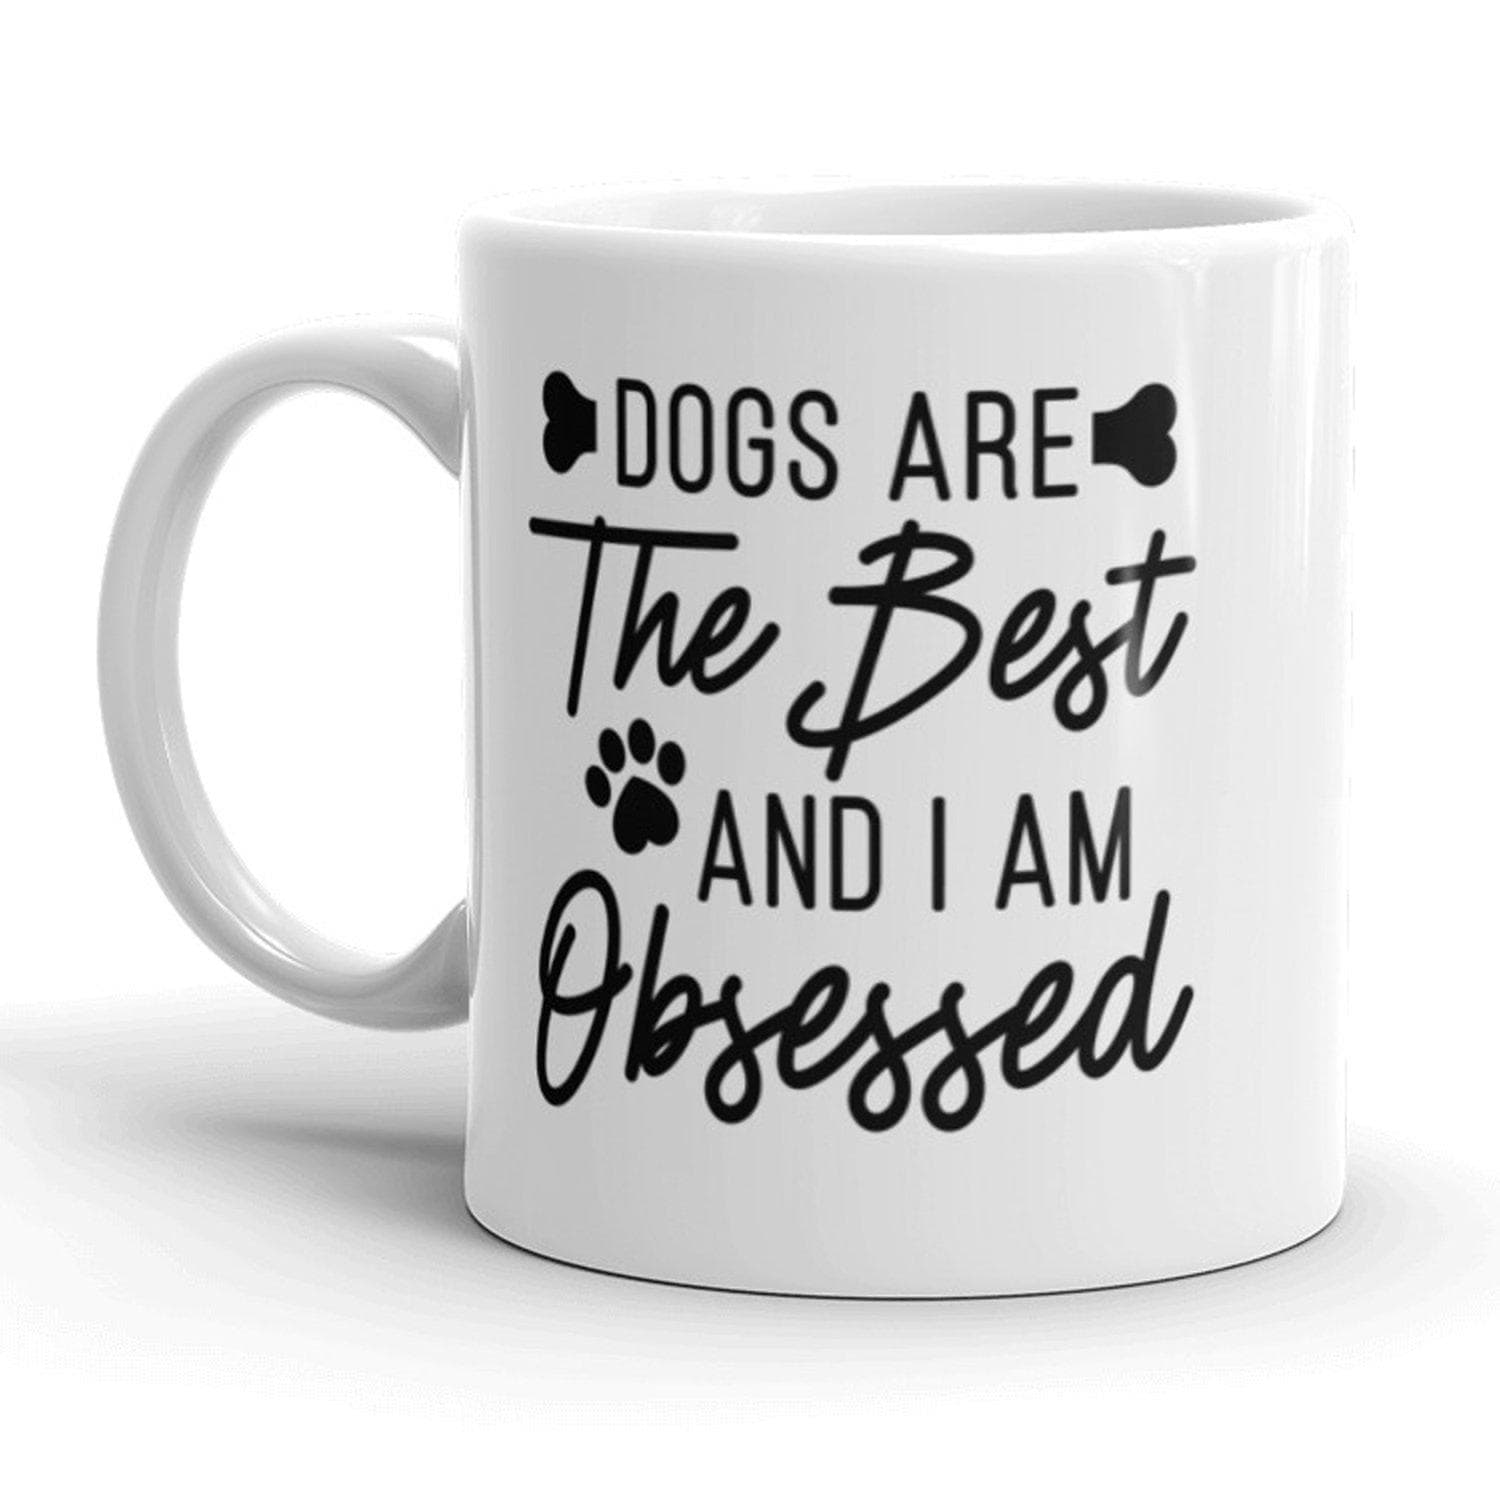 Dogs Are The Best And I'm Obsessed Mug - Crazy Dog T-Shirts